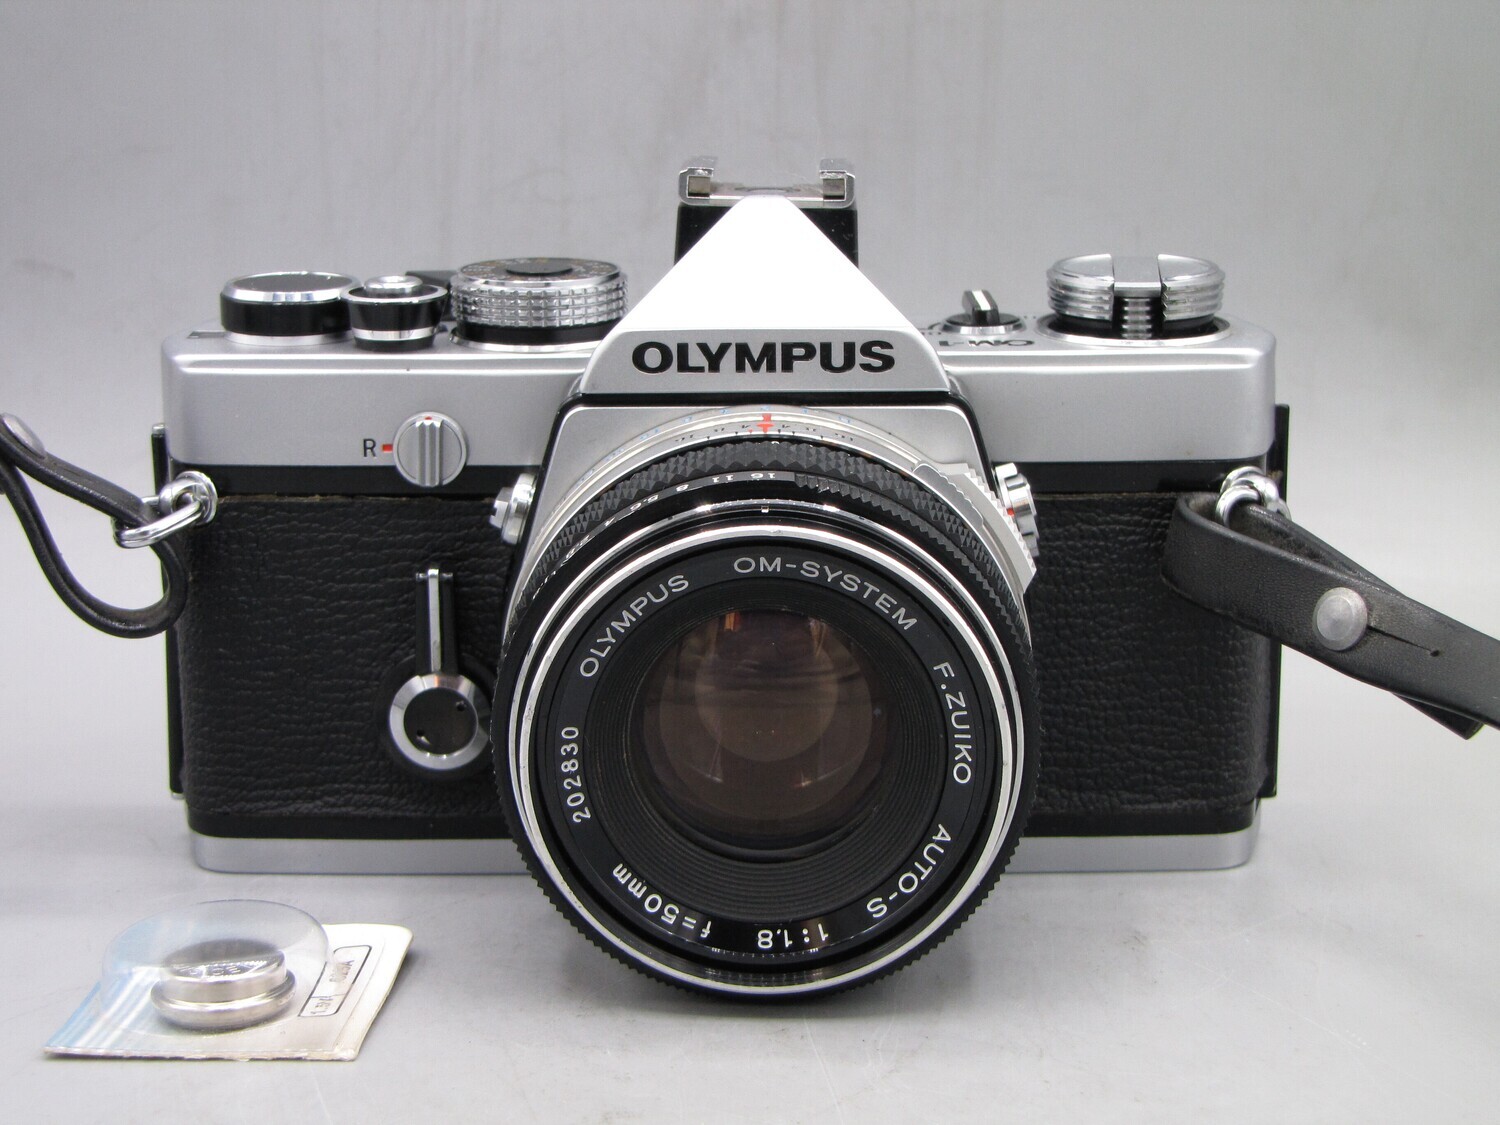 Olympus OM1 35mm SLR Camera w 1.8/50 Clad Seals Battery Tested - As Is